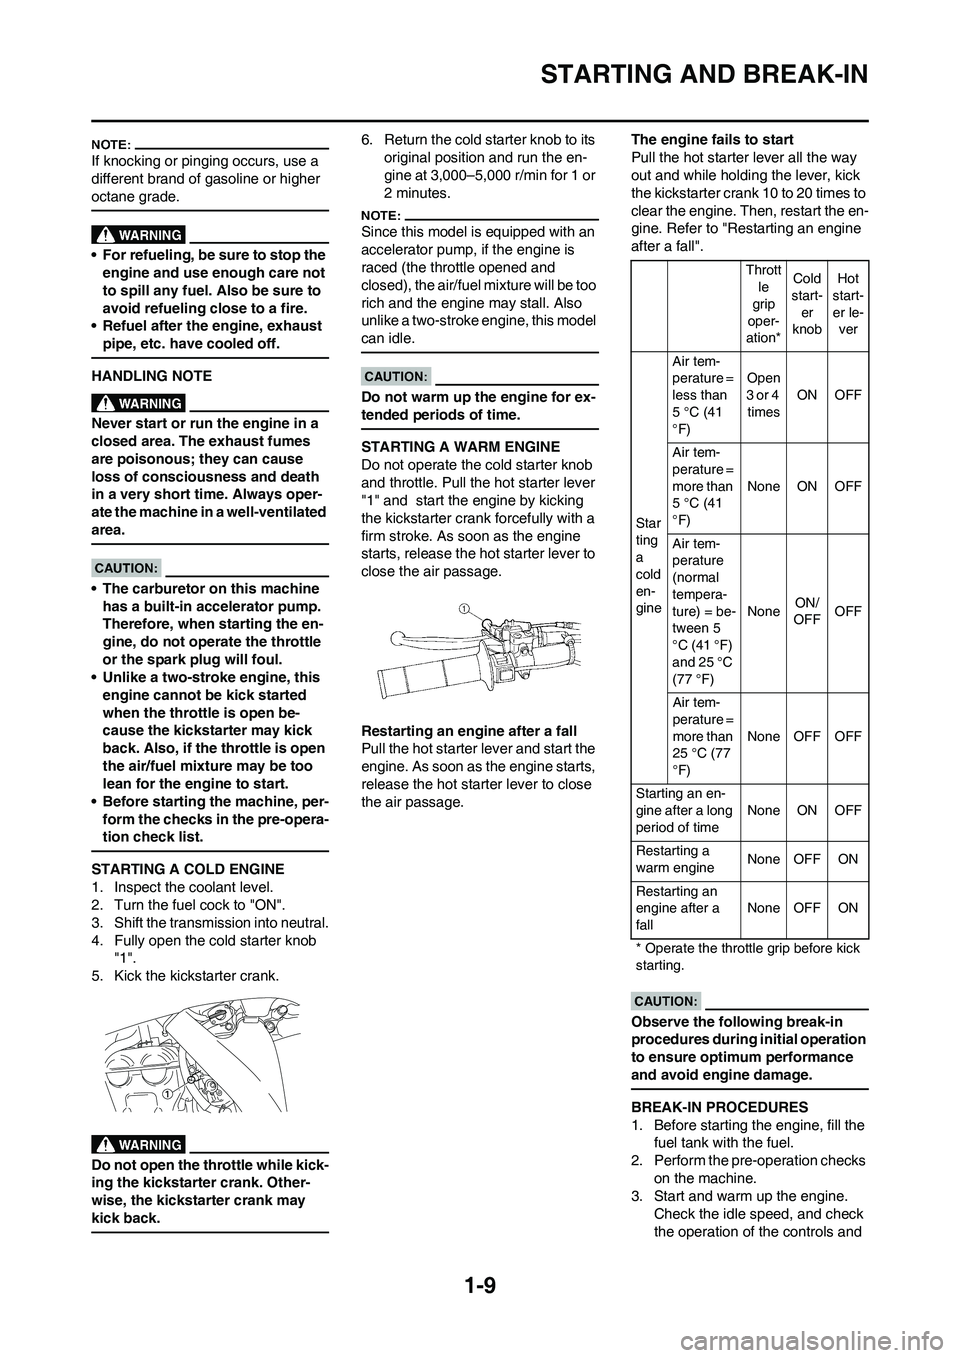 YAMAHA YZ450F 2008  Owners Manual 1-9
STARTING AND BREAK-IN
If knocking or pinging occurs, use a 
different brand of gasoline or higher 
octane grade.
• For refueling, be sure to stop the 
engine and use enough care not 
to spill an